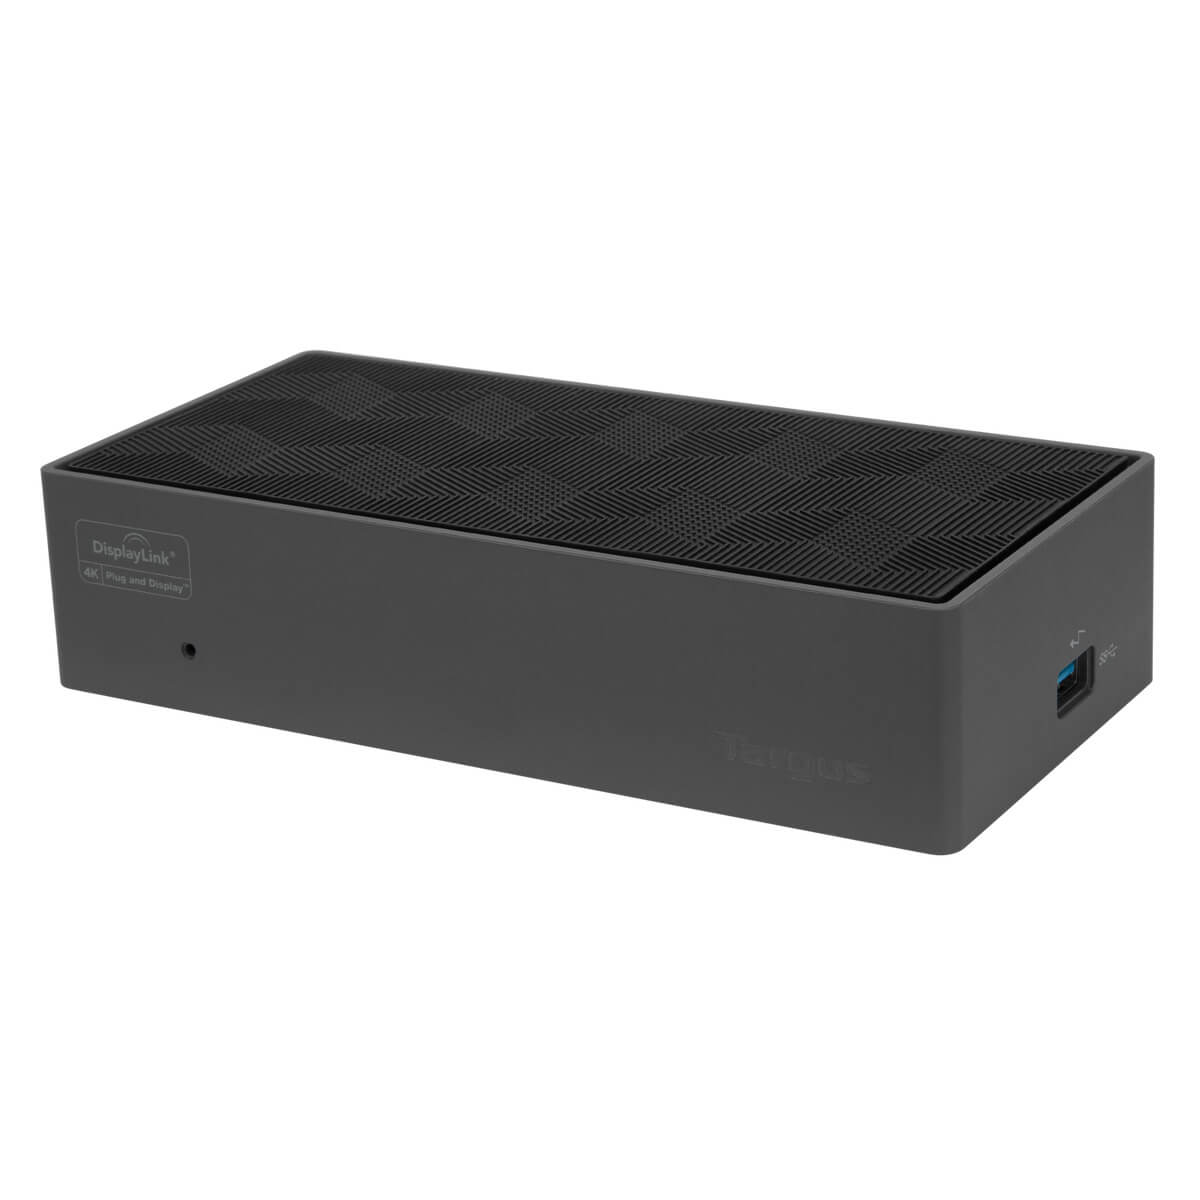 Hdmi And Displayport Docking Station With Power Order At Targus